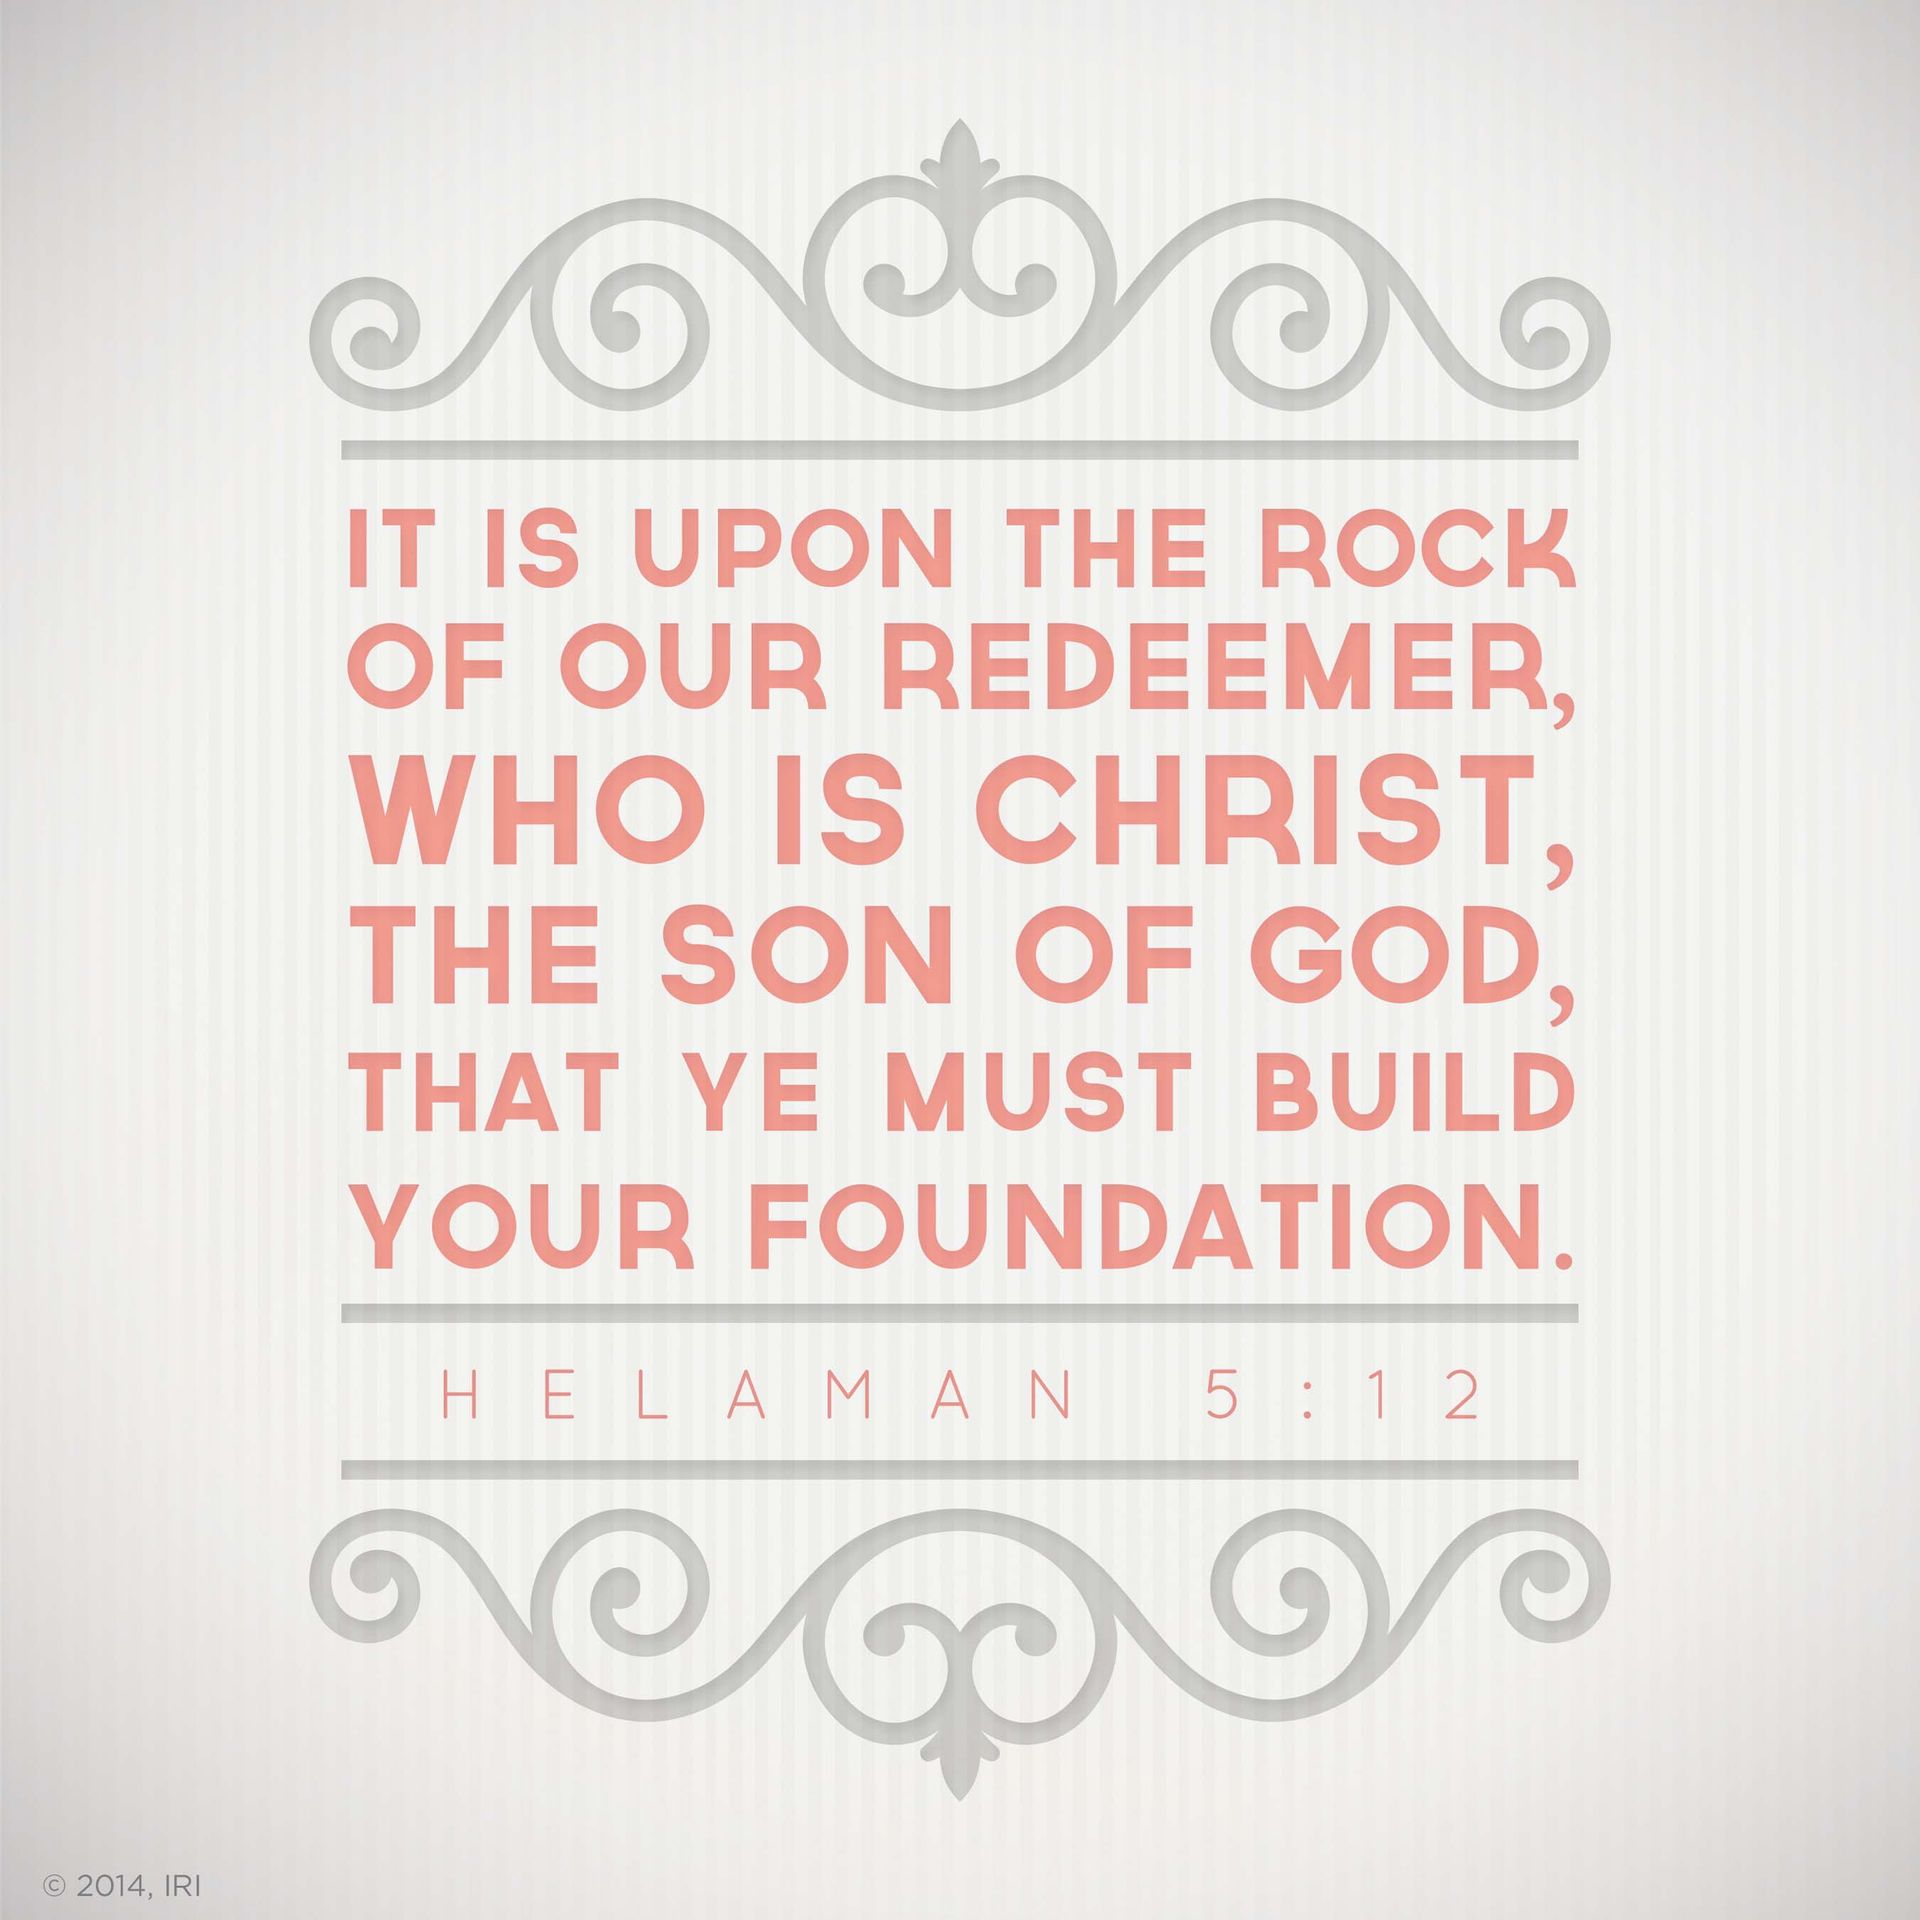 “It is upon the rock of our Redeemer, who is Christ, the Son of God, that ye must build your foundation.”—Helaman 5:12